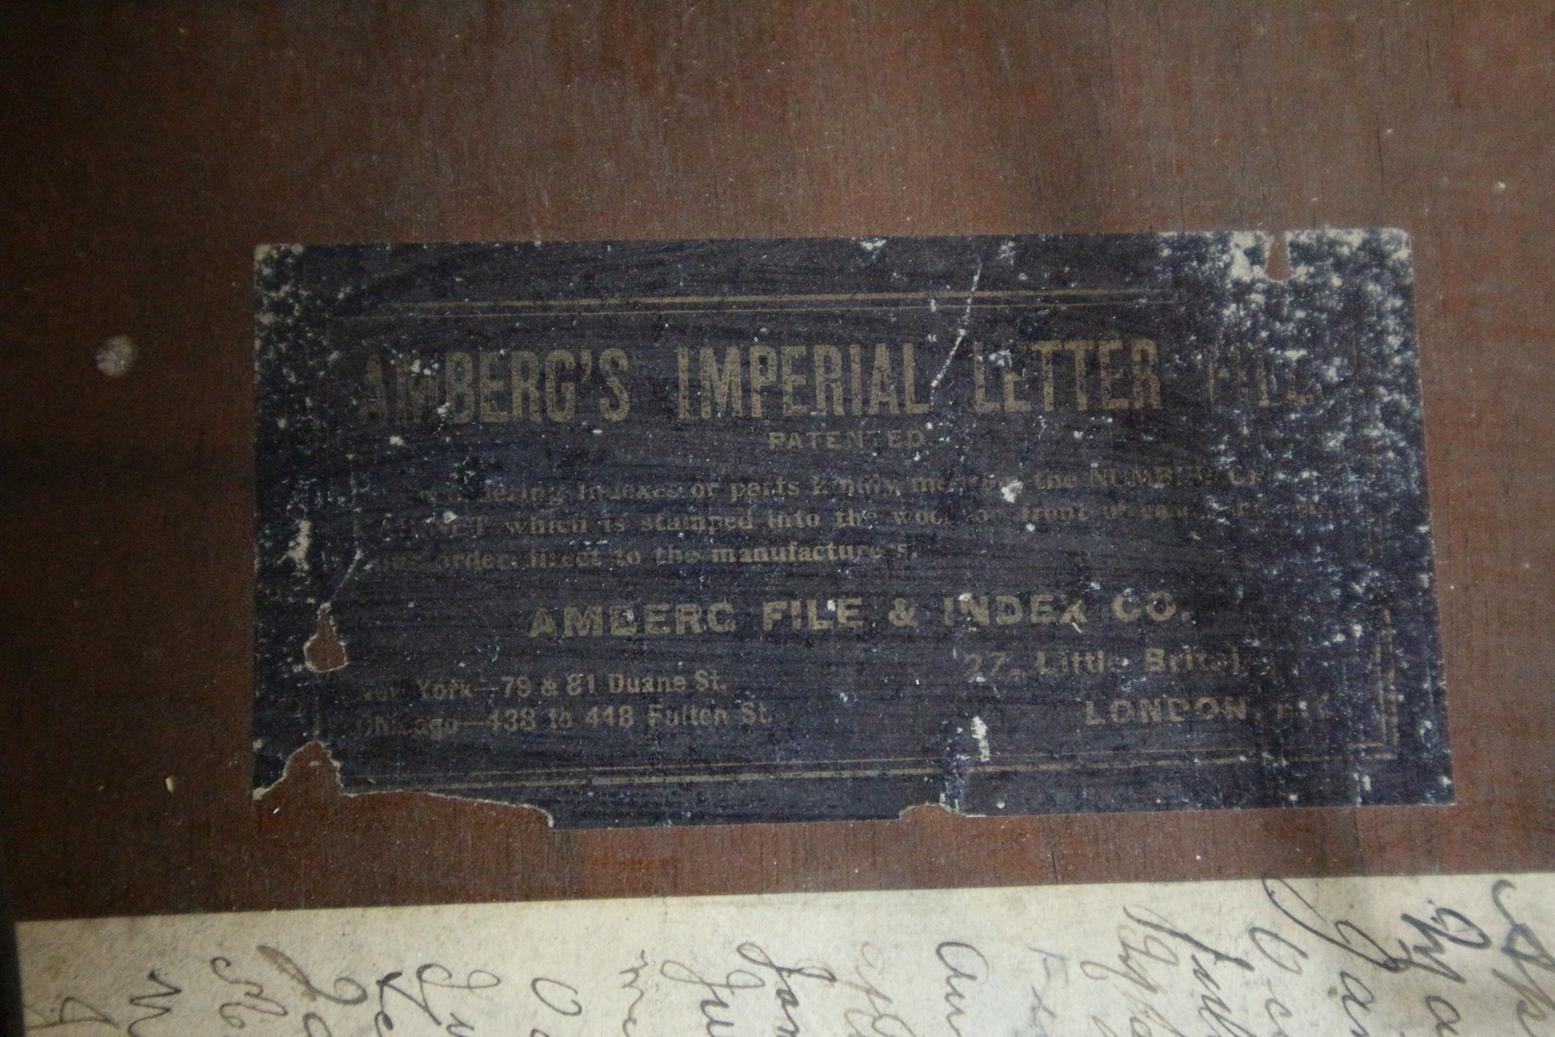 Early 20th Century Amberg's Imperial Letter File by Amberg File & Index Co.